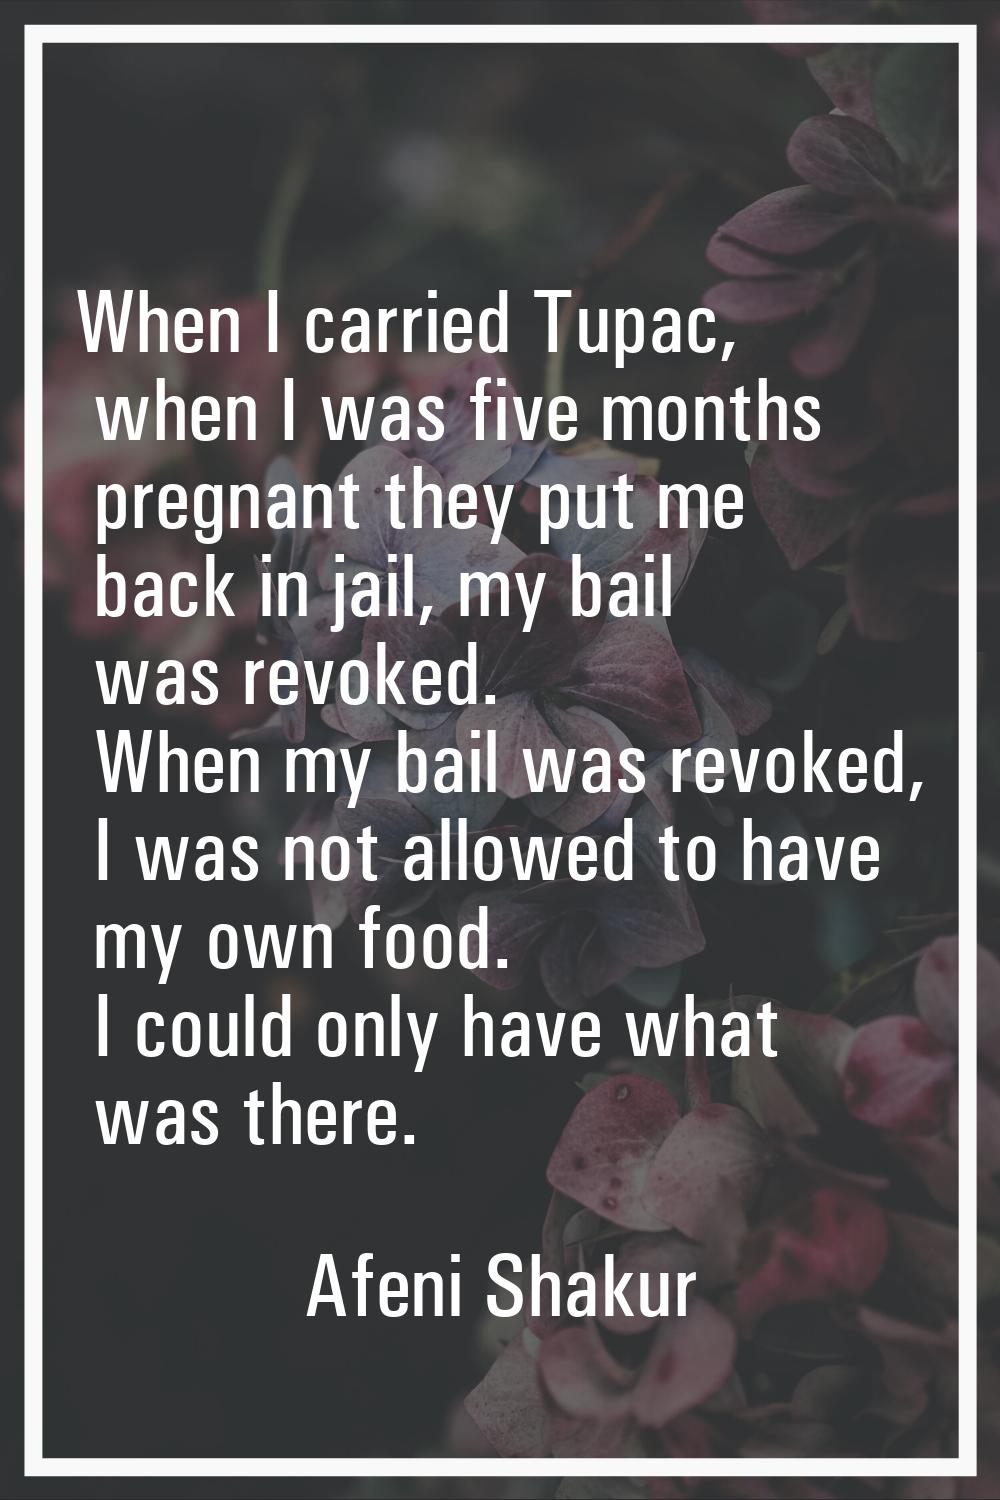 When I carried Tupac, when I was five months pregnant they put me back in jail, my bail was revoked